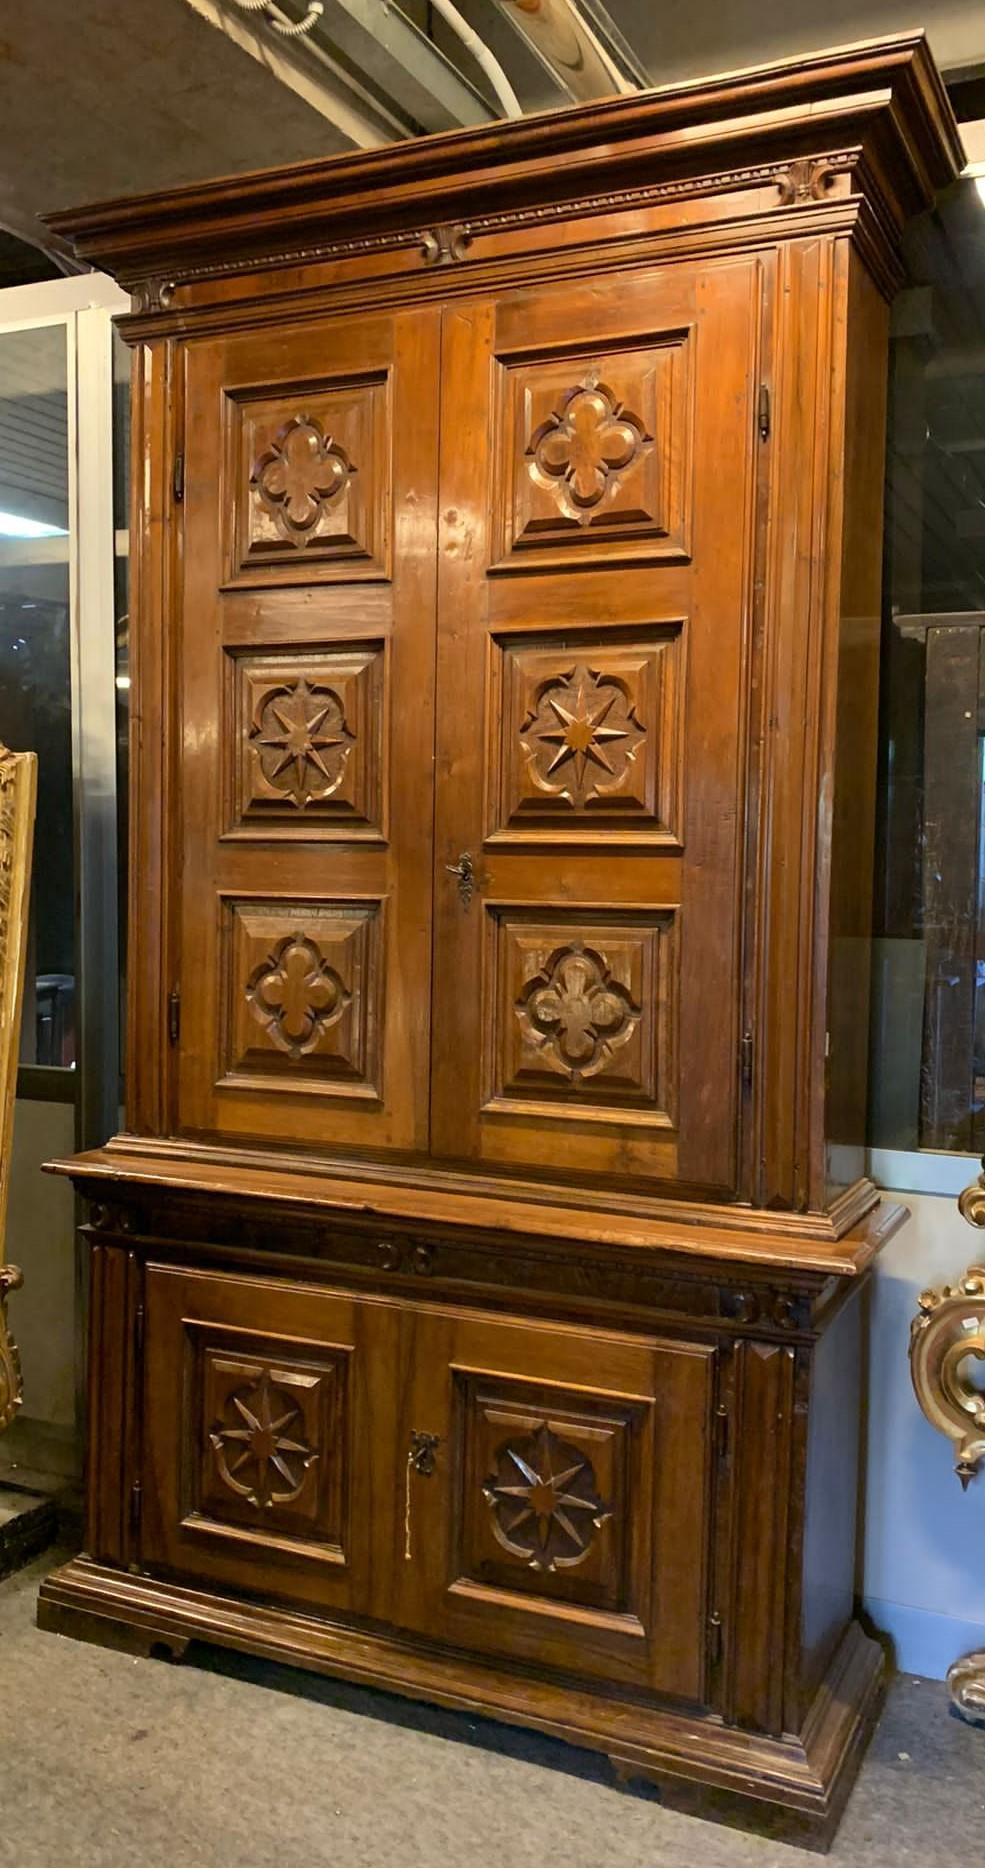 Antique double-body cabinet, in precious walnut wood patinated by time, richly hand-carved with stars and baroque motifs, from Tuscany, original from the 1600s, maximum measurement cm w 160 x H 280 (95 cm low, 185 cm wide high) x D 50.
Ideal in a